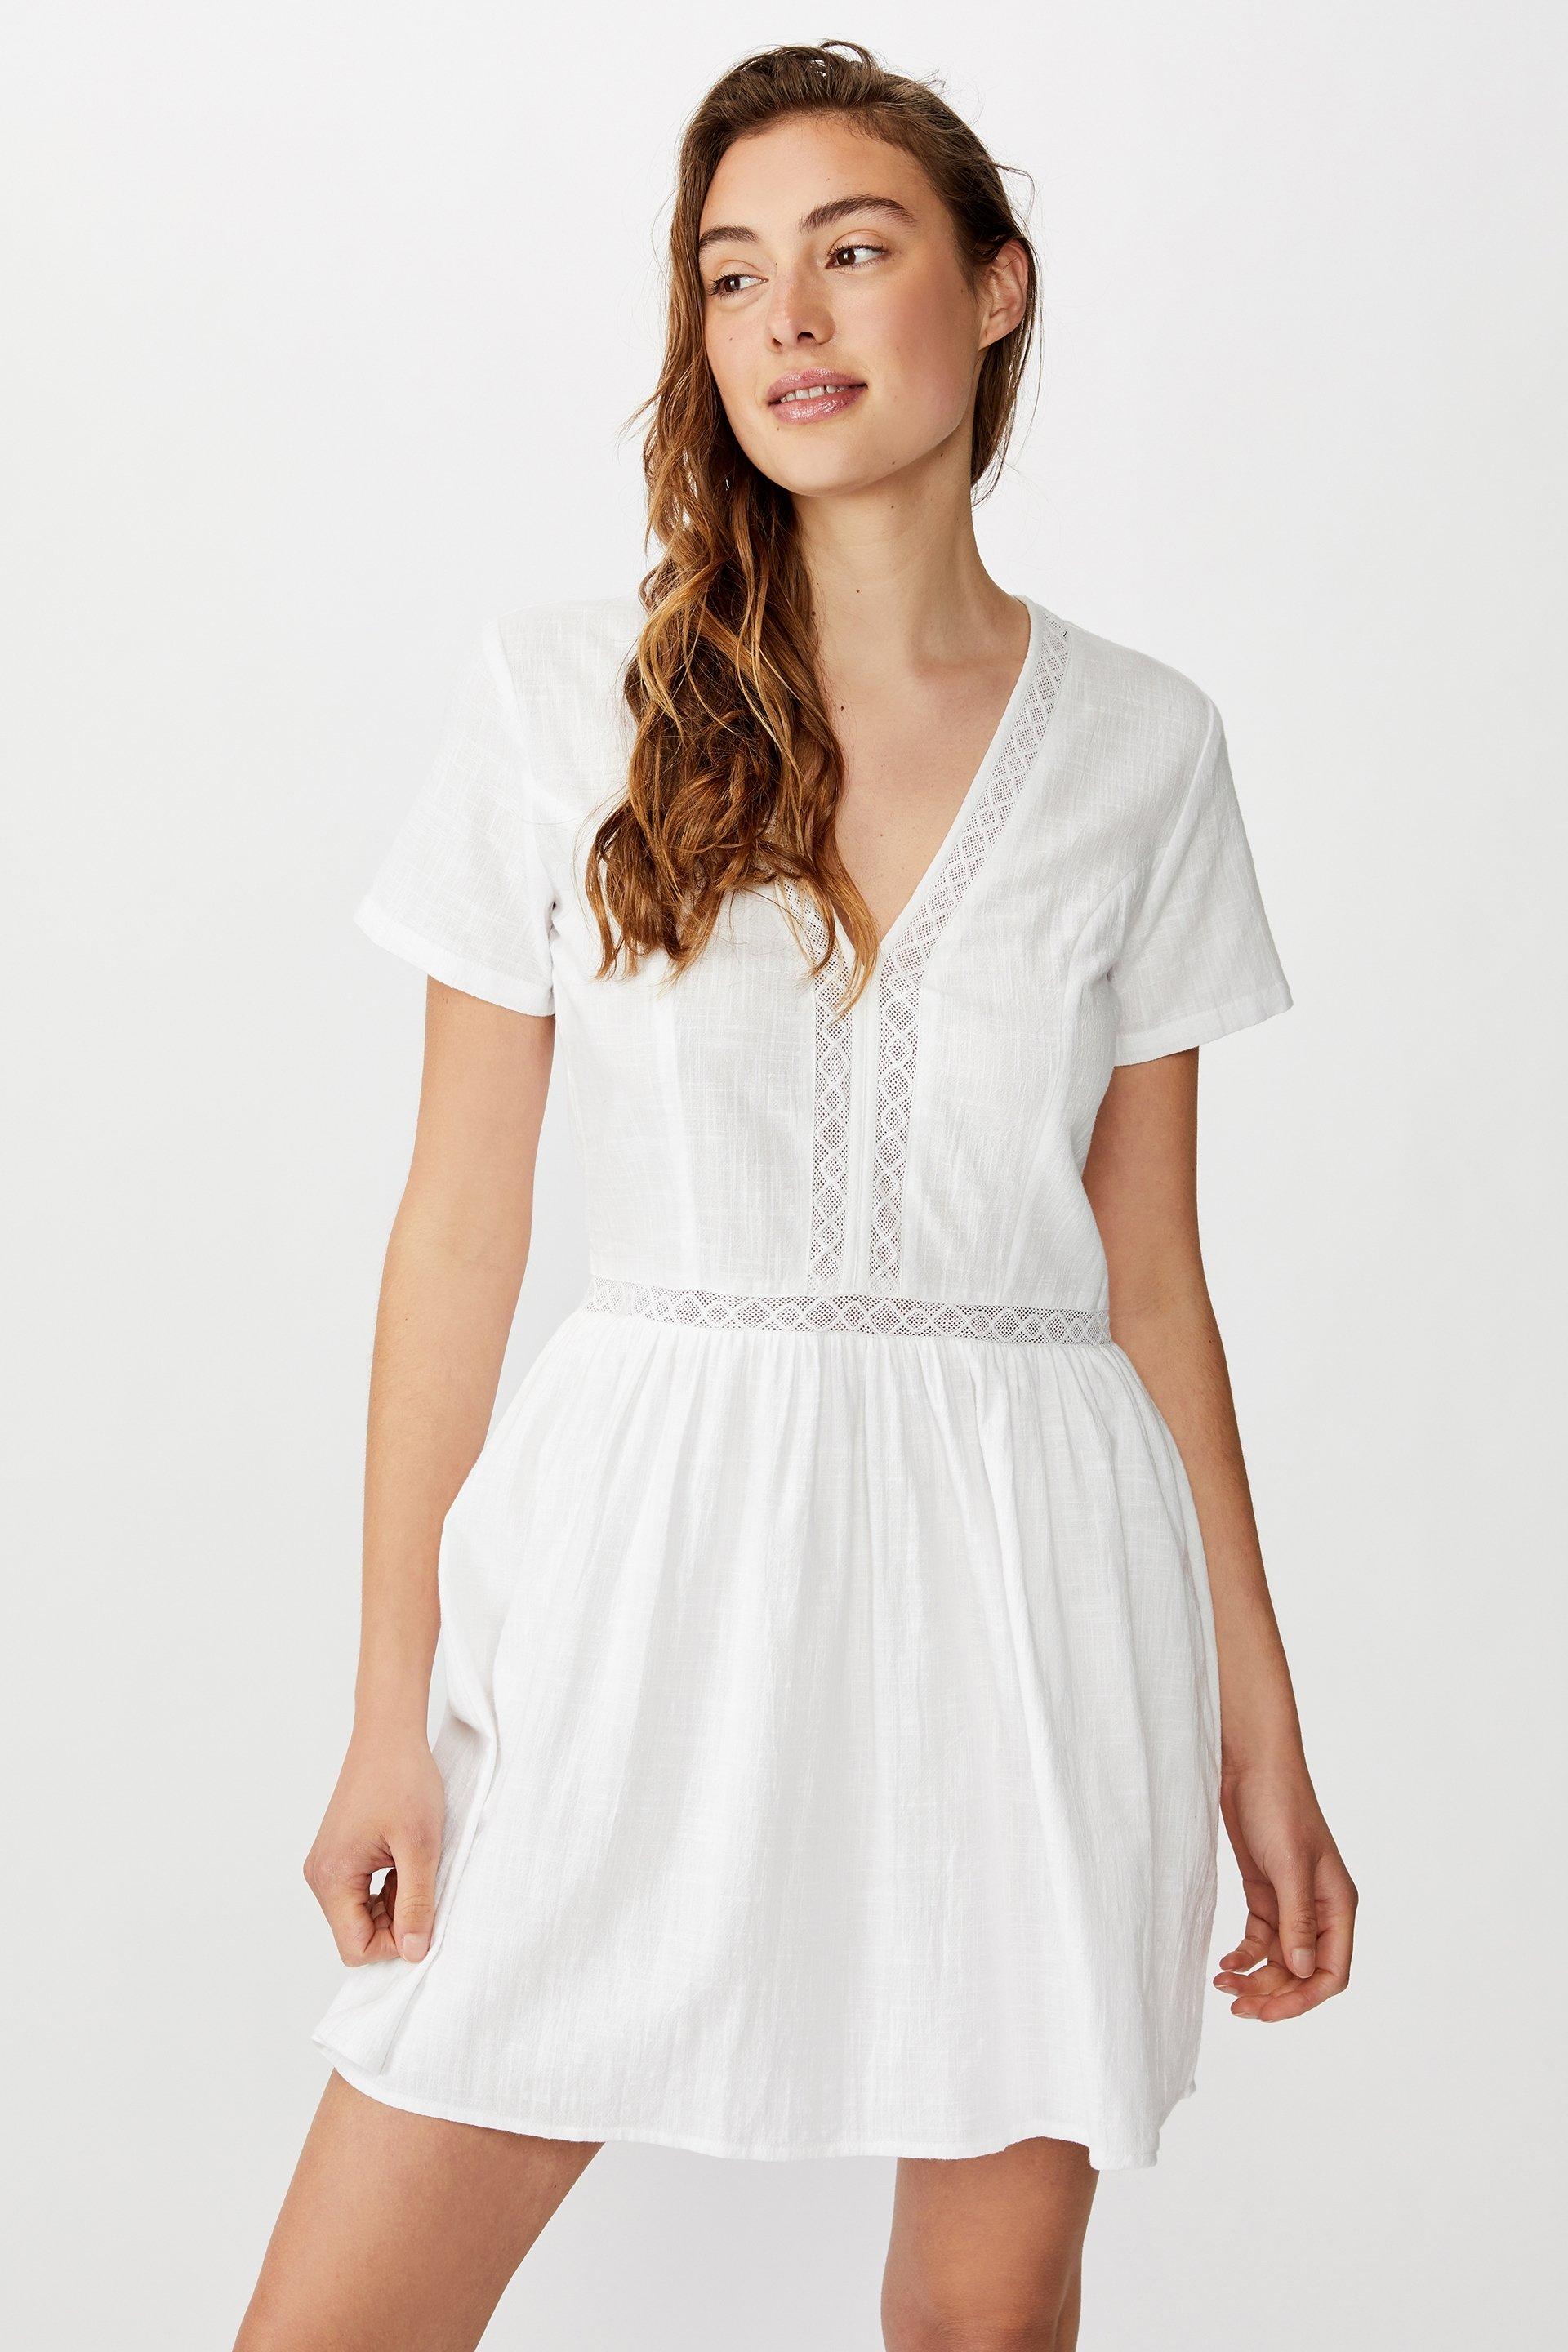 Woven harlow short sleeve mini dress - white Cotton On Casual ...